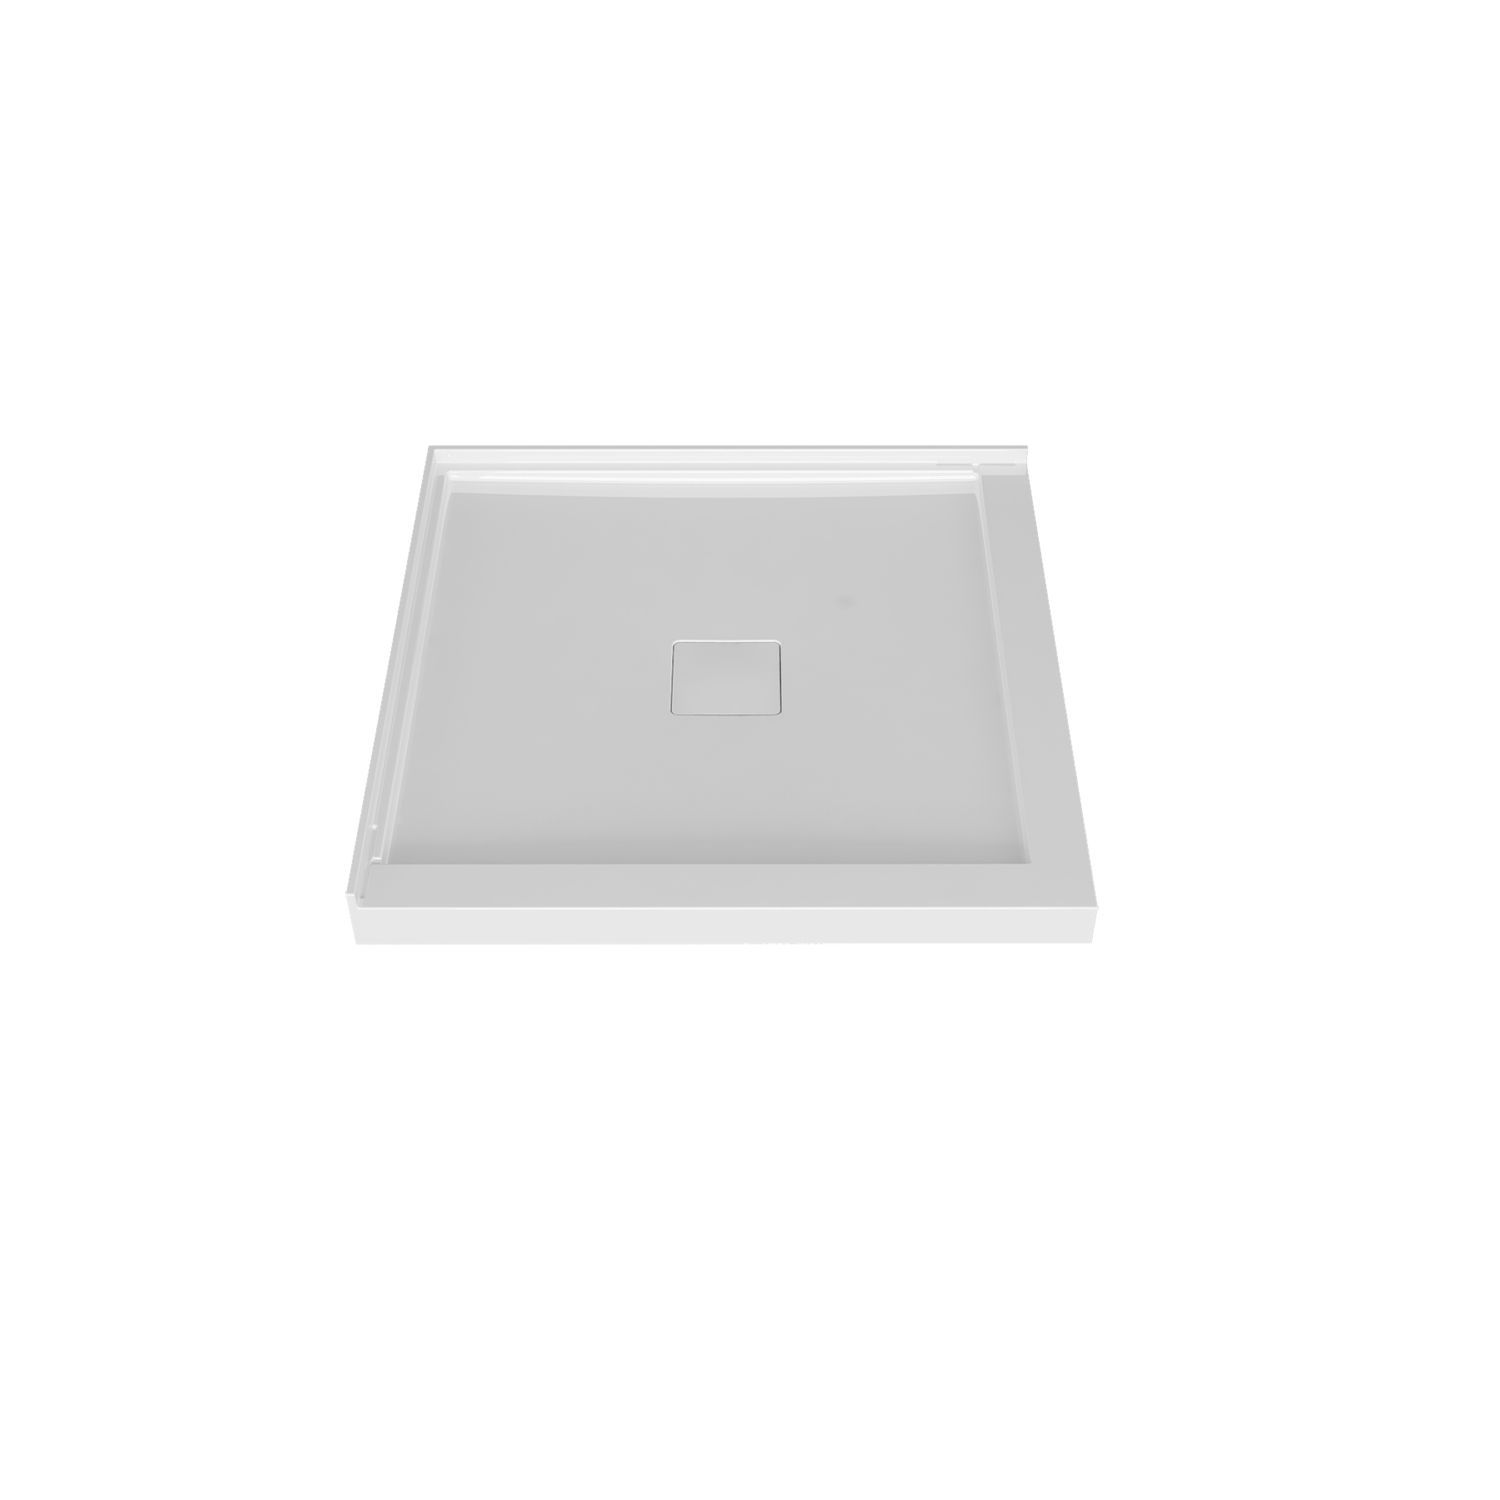 Shower base 36 x 36, in a corner, in glossy white